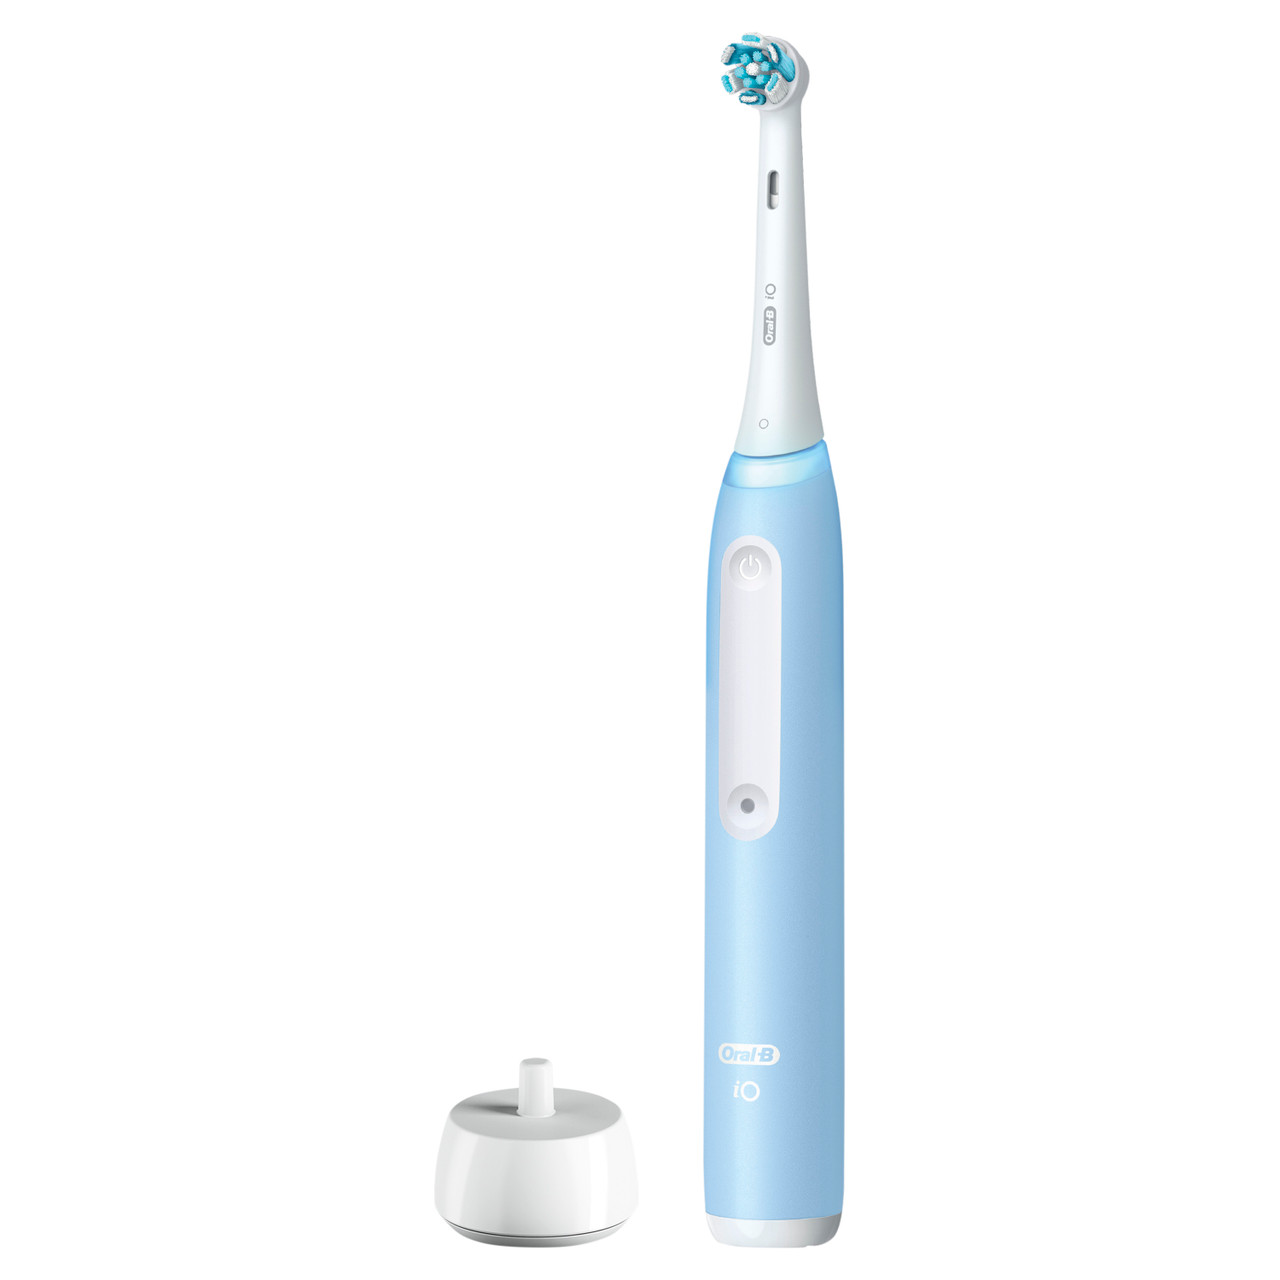 Oral-B iO Series 3 Electric Toothbrush with Brush Heads, Rechargeable Blue